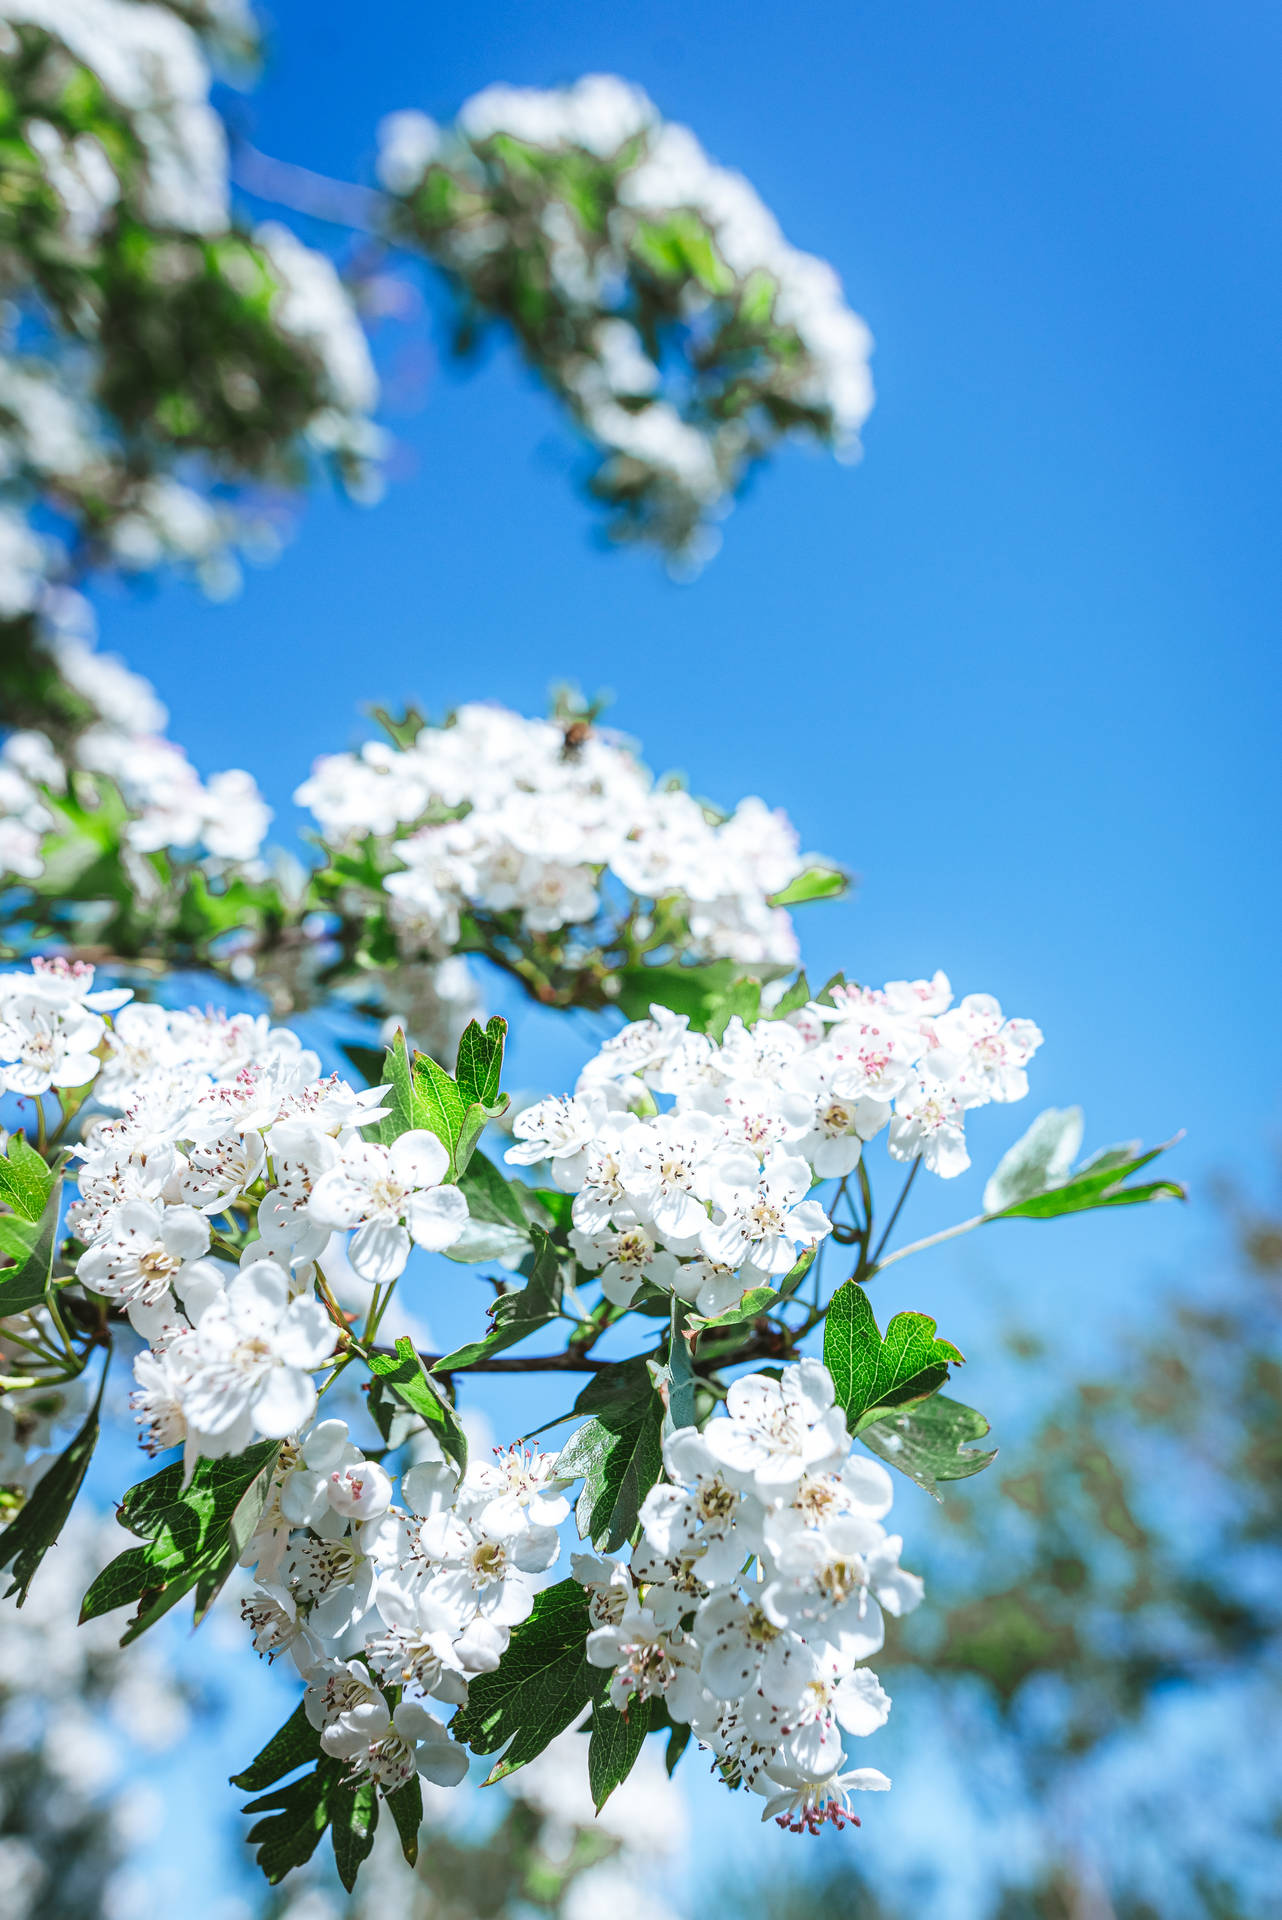 Aesthetic Baby Blue Sky With Flowers Wallpaper